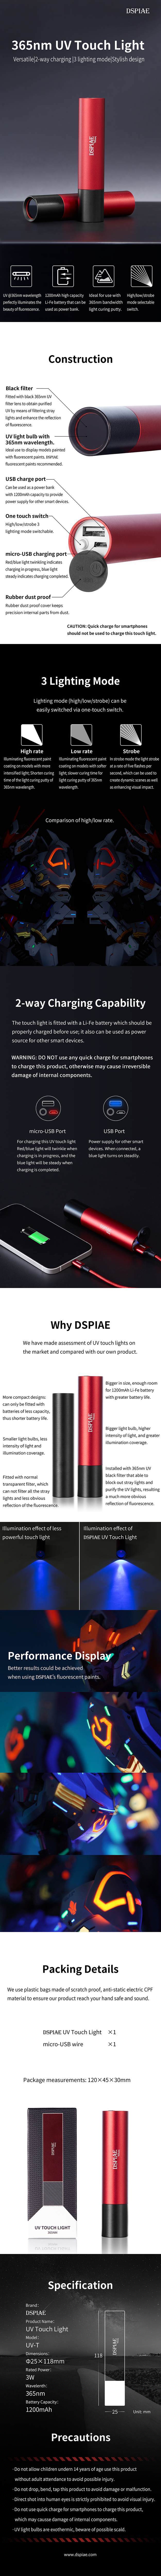 DSPIAE: 365nm Ultraviolet Light Torch